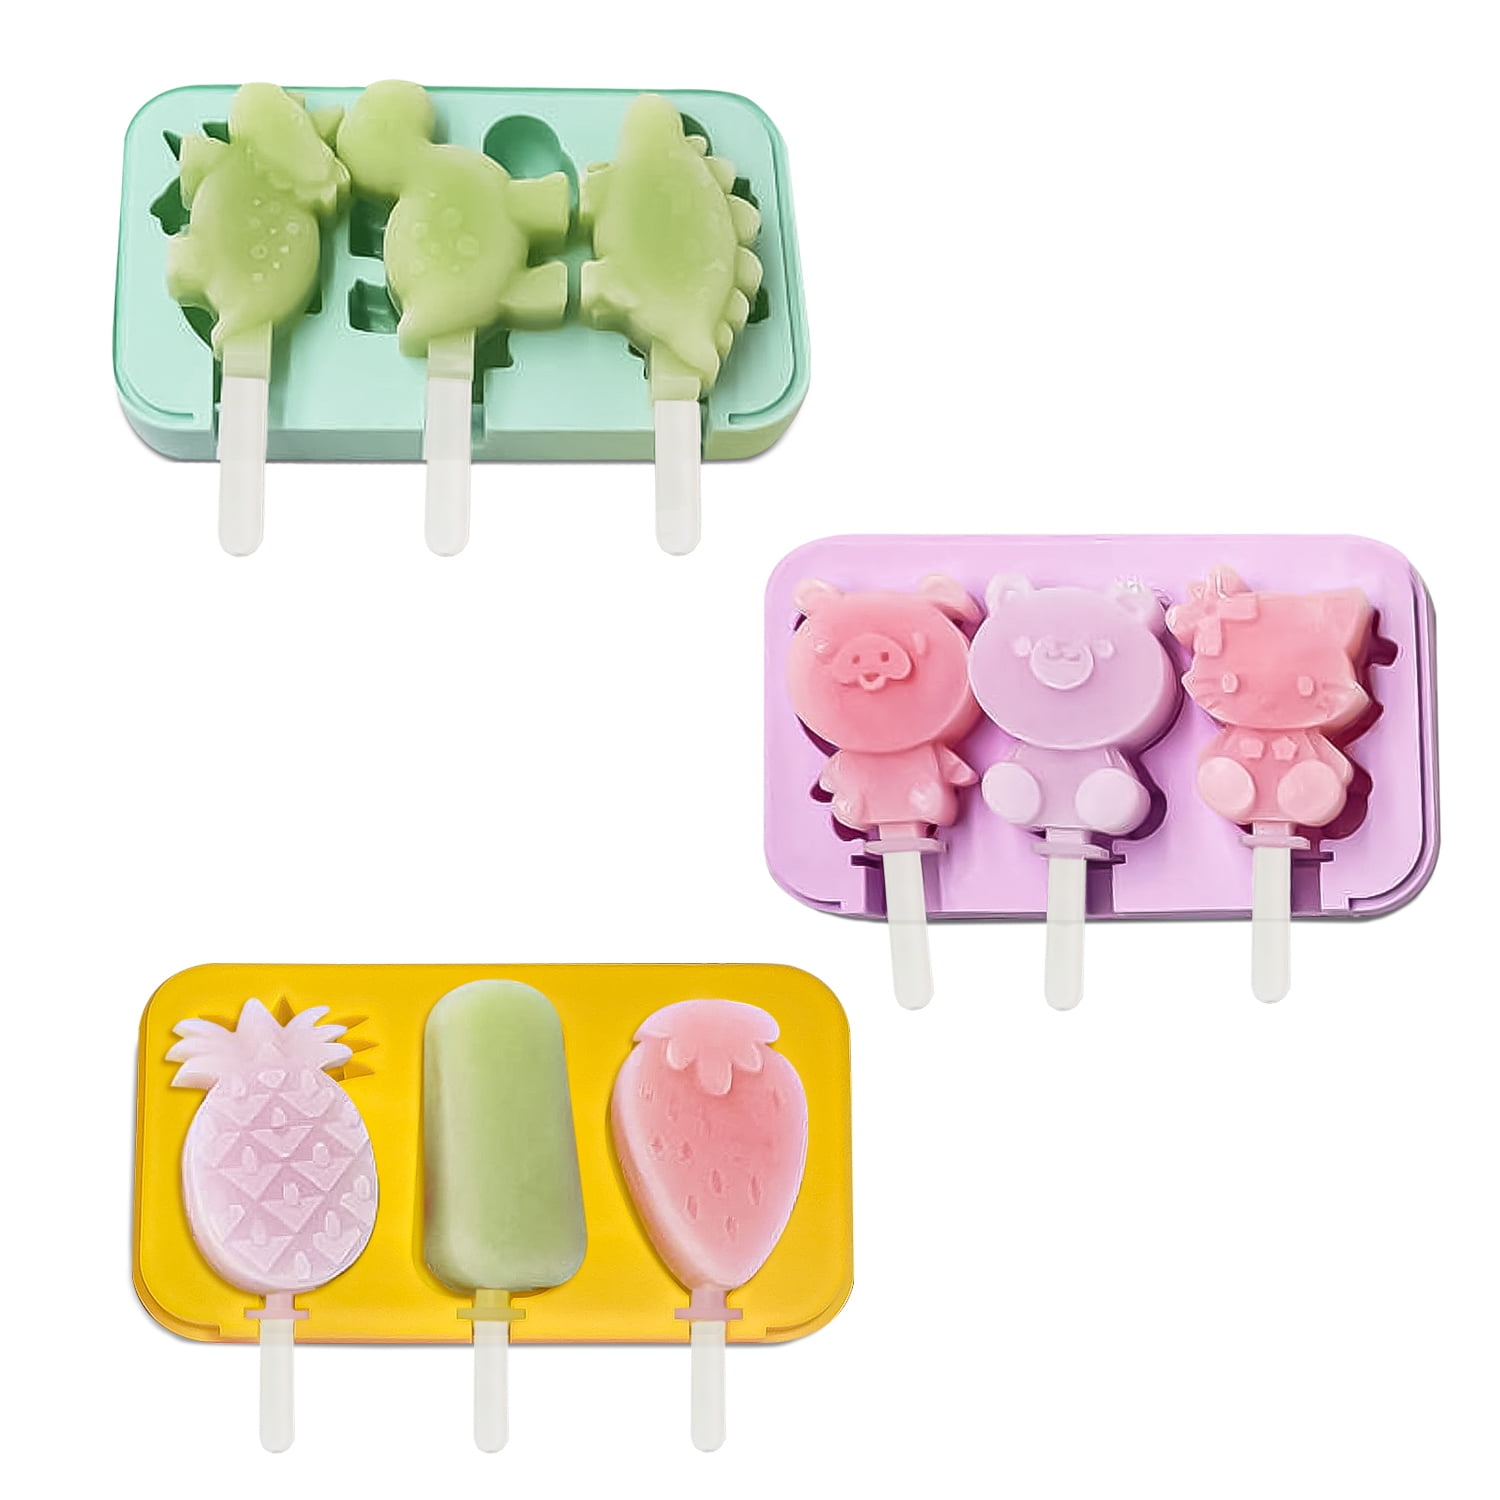 Tovolo Zombie Popsicle Molds (Set of 4) - Mess-Free Silicone Ice Pops with  Reusable Sticks for Freezer Snacks / Dishwasher-Safe & BPA-Free,Green/White